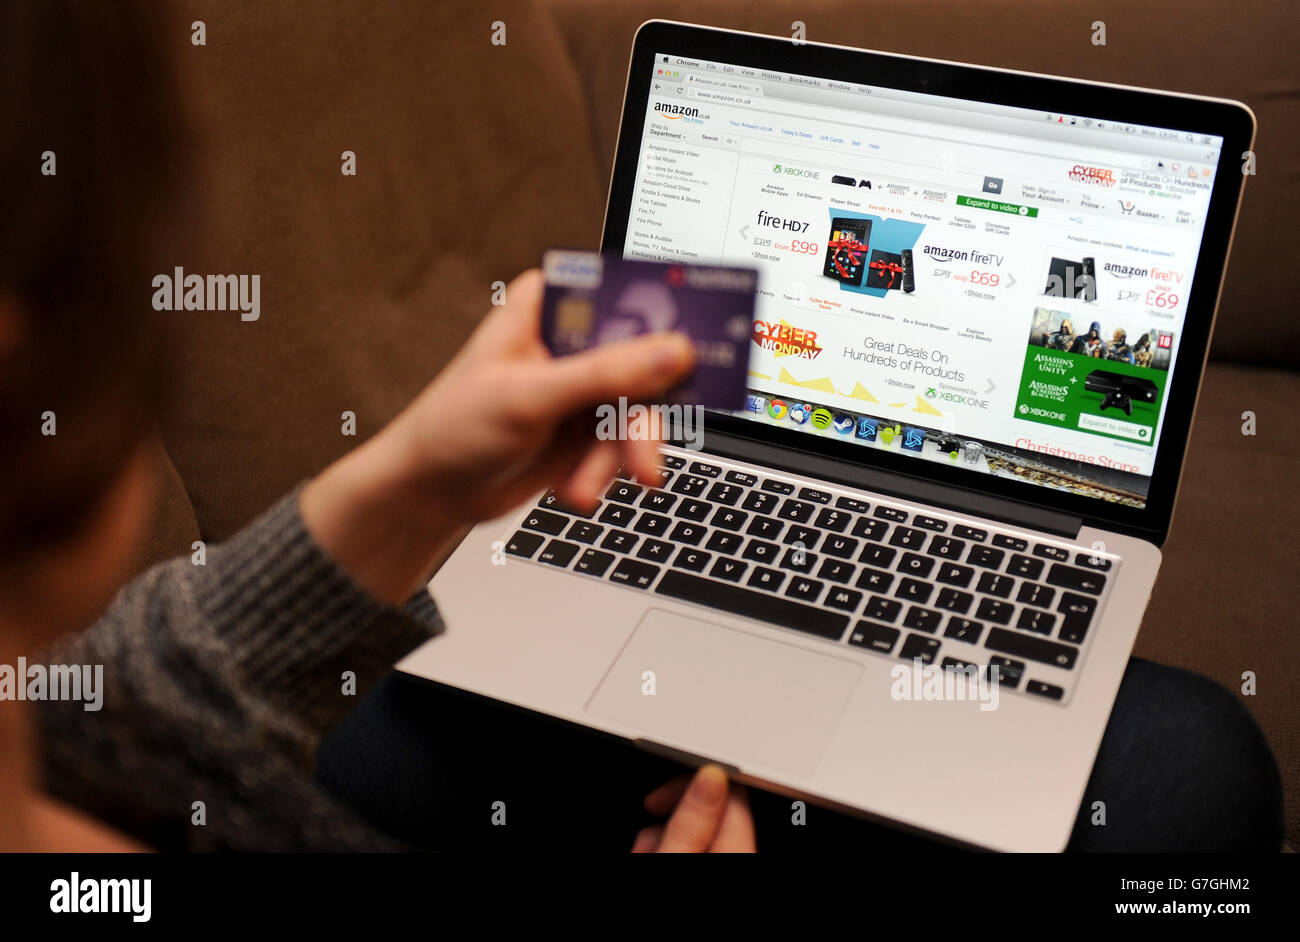 Online Retail Stock. A woman uses a laptop to browse the Amazon website Stock Photo